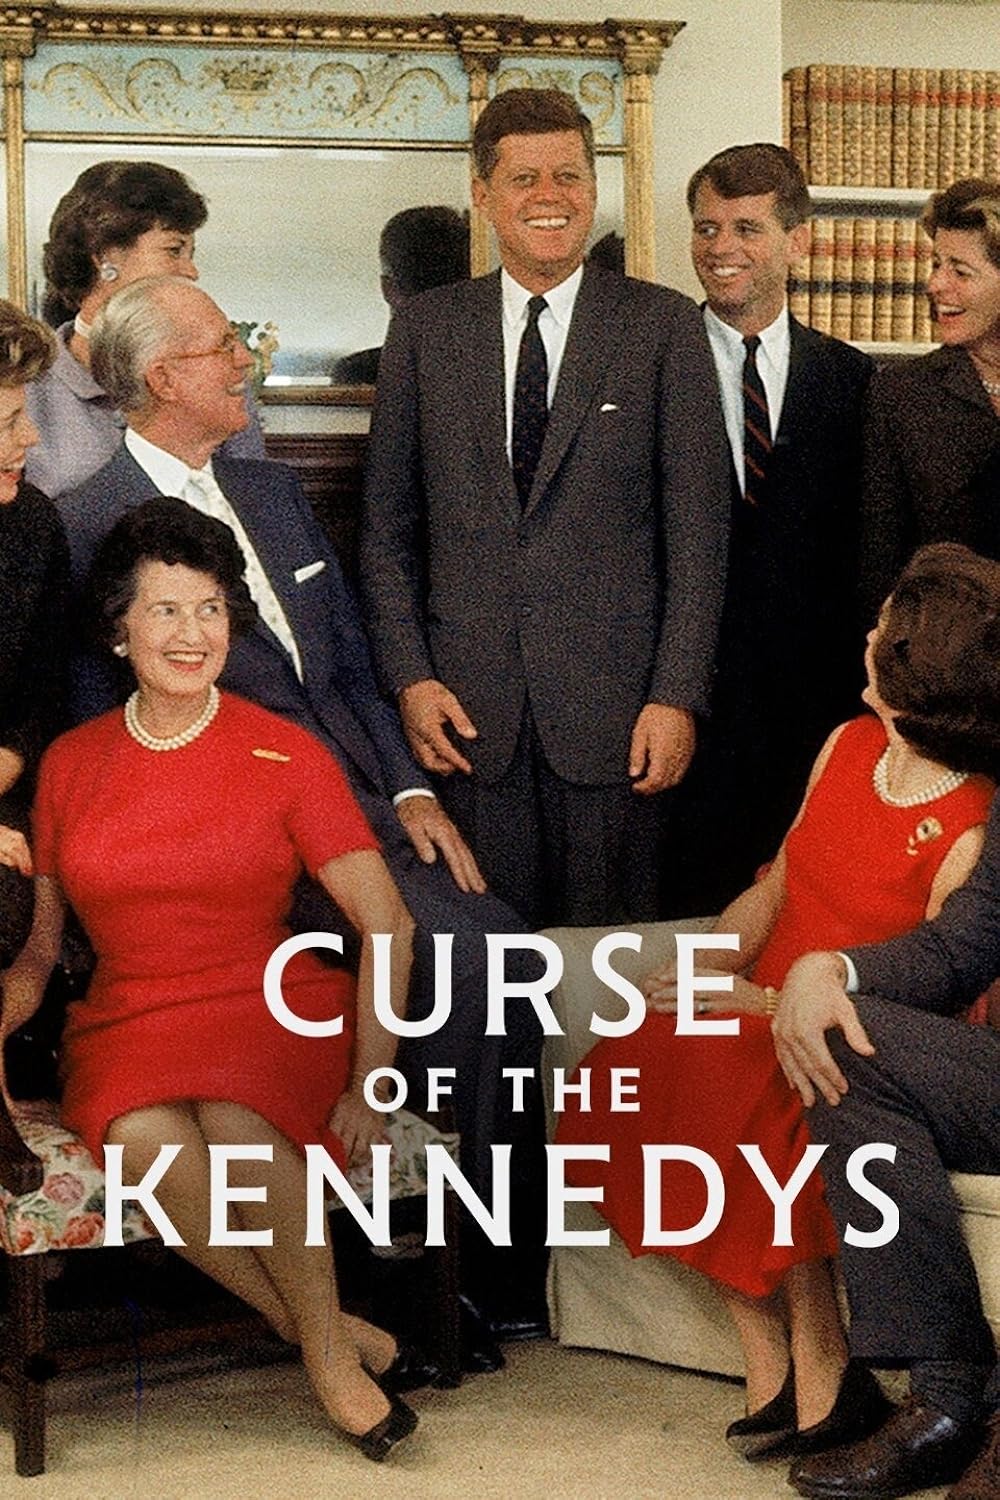 Curse of the Kennedys The Kennedys: A Fatal Ambition